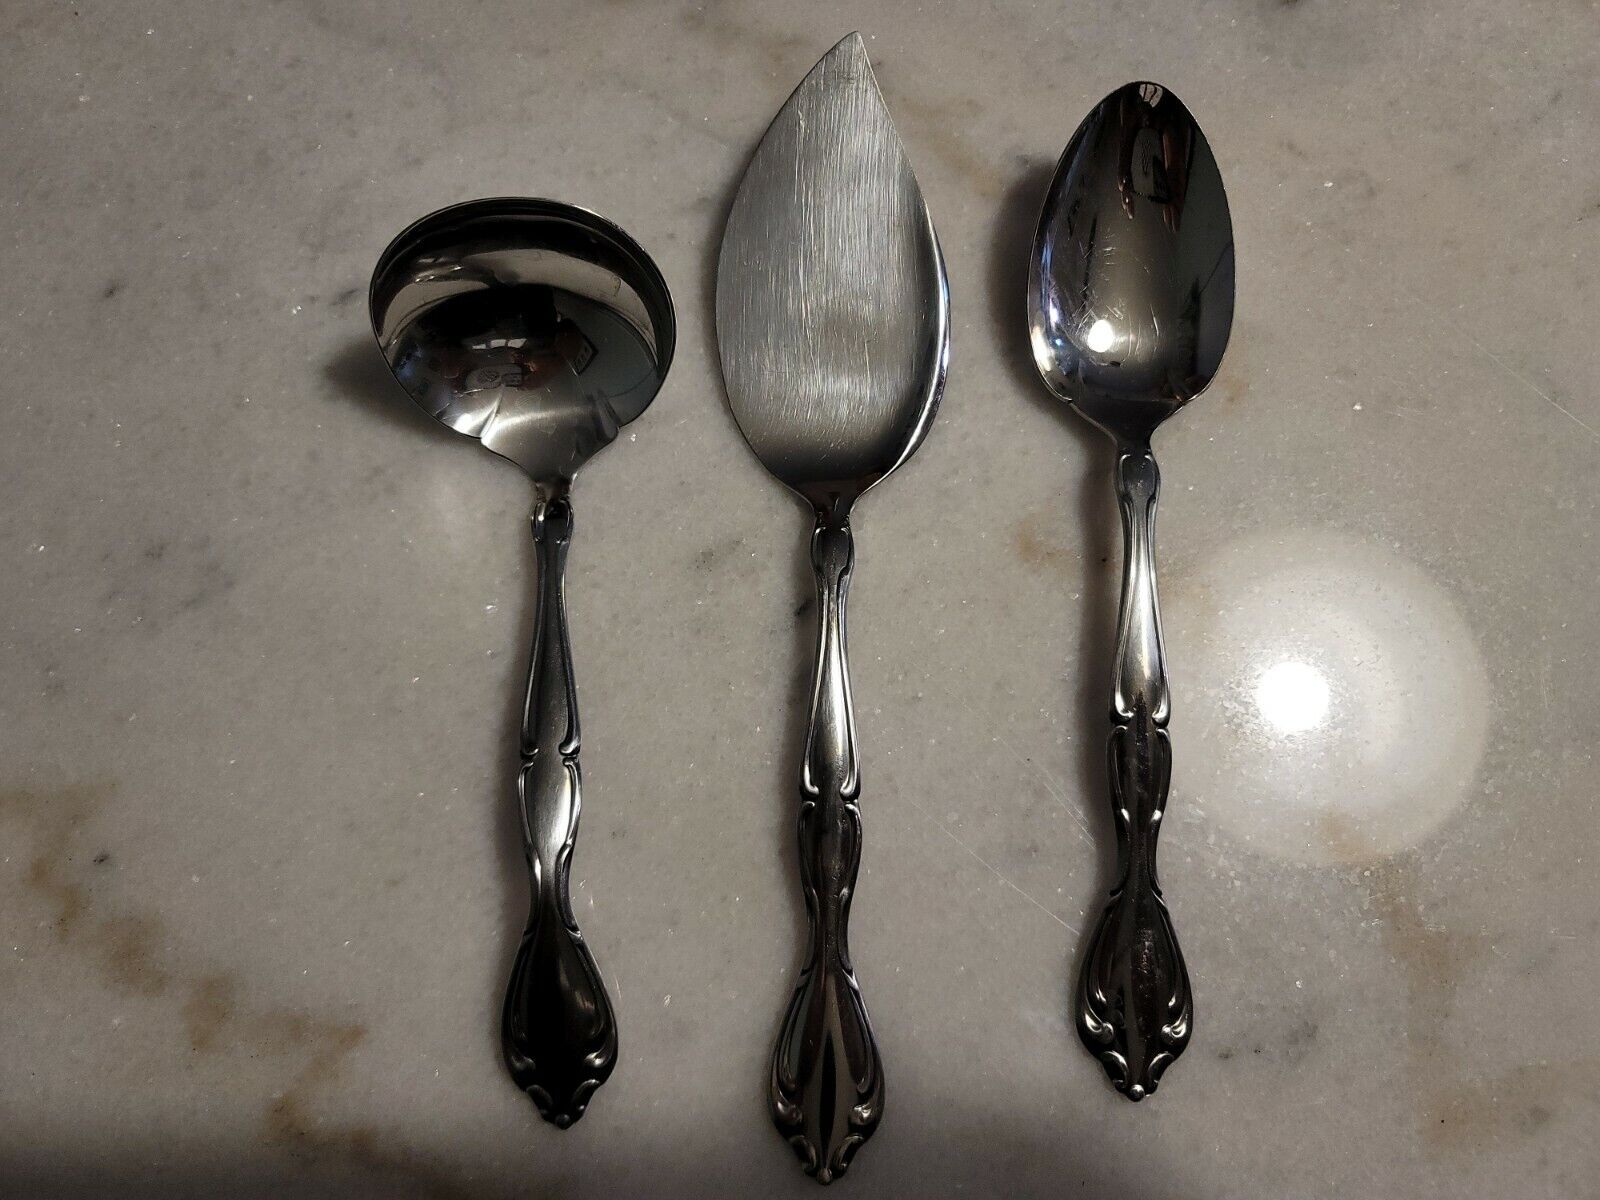 3 Piece Completer Set Cantata (Stainless) by ONEIDA SILVER ladle spoon pie serve